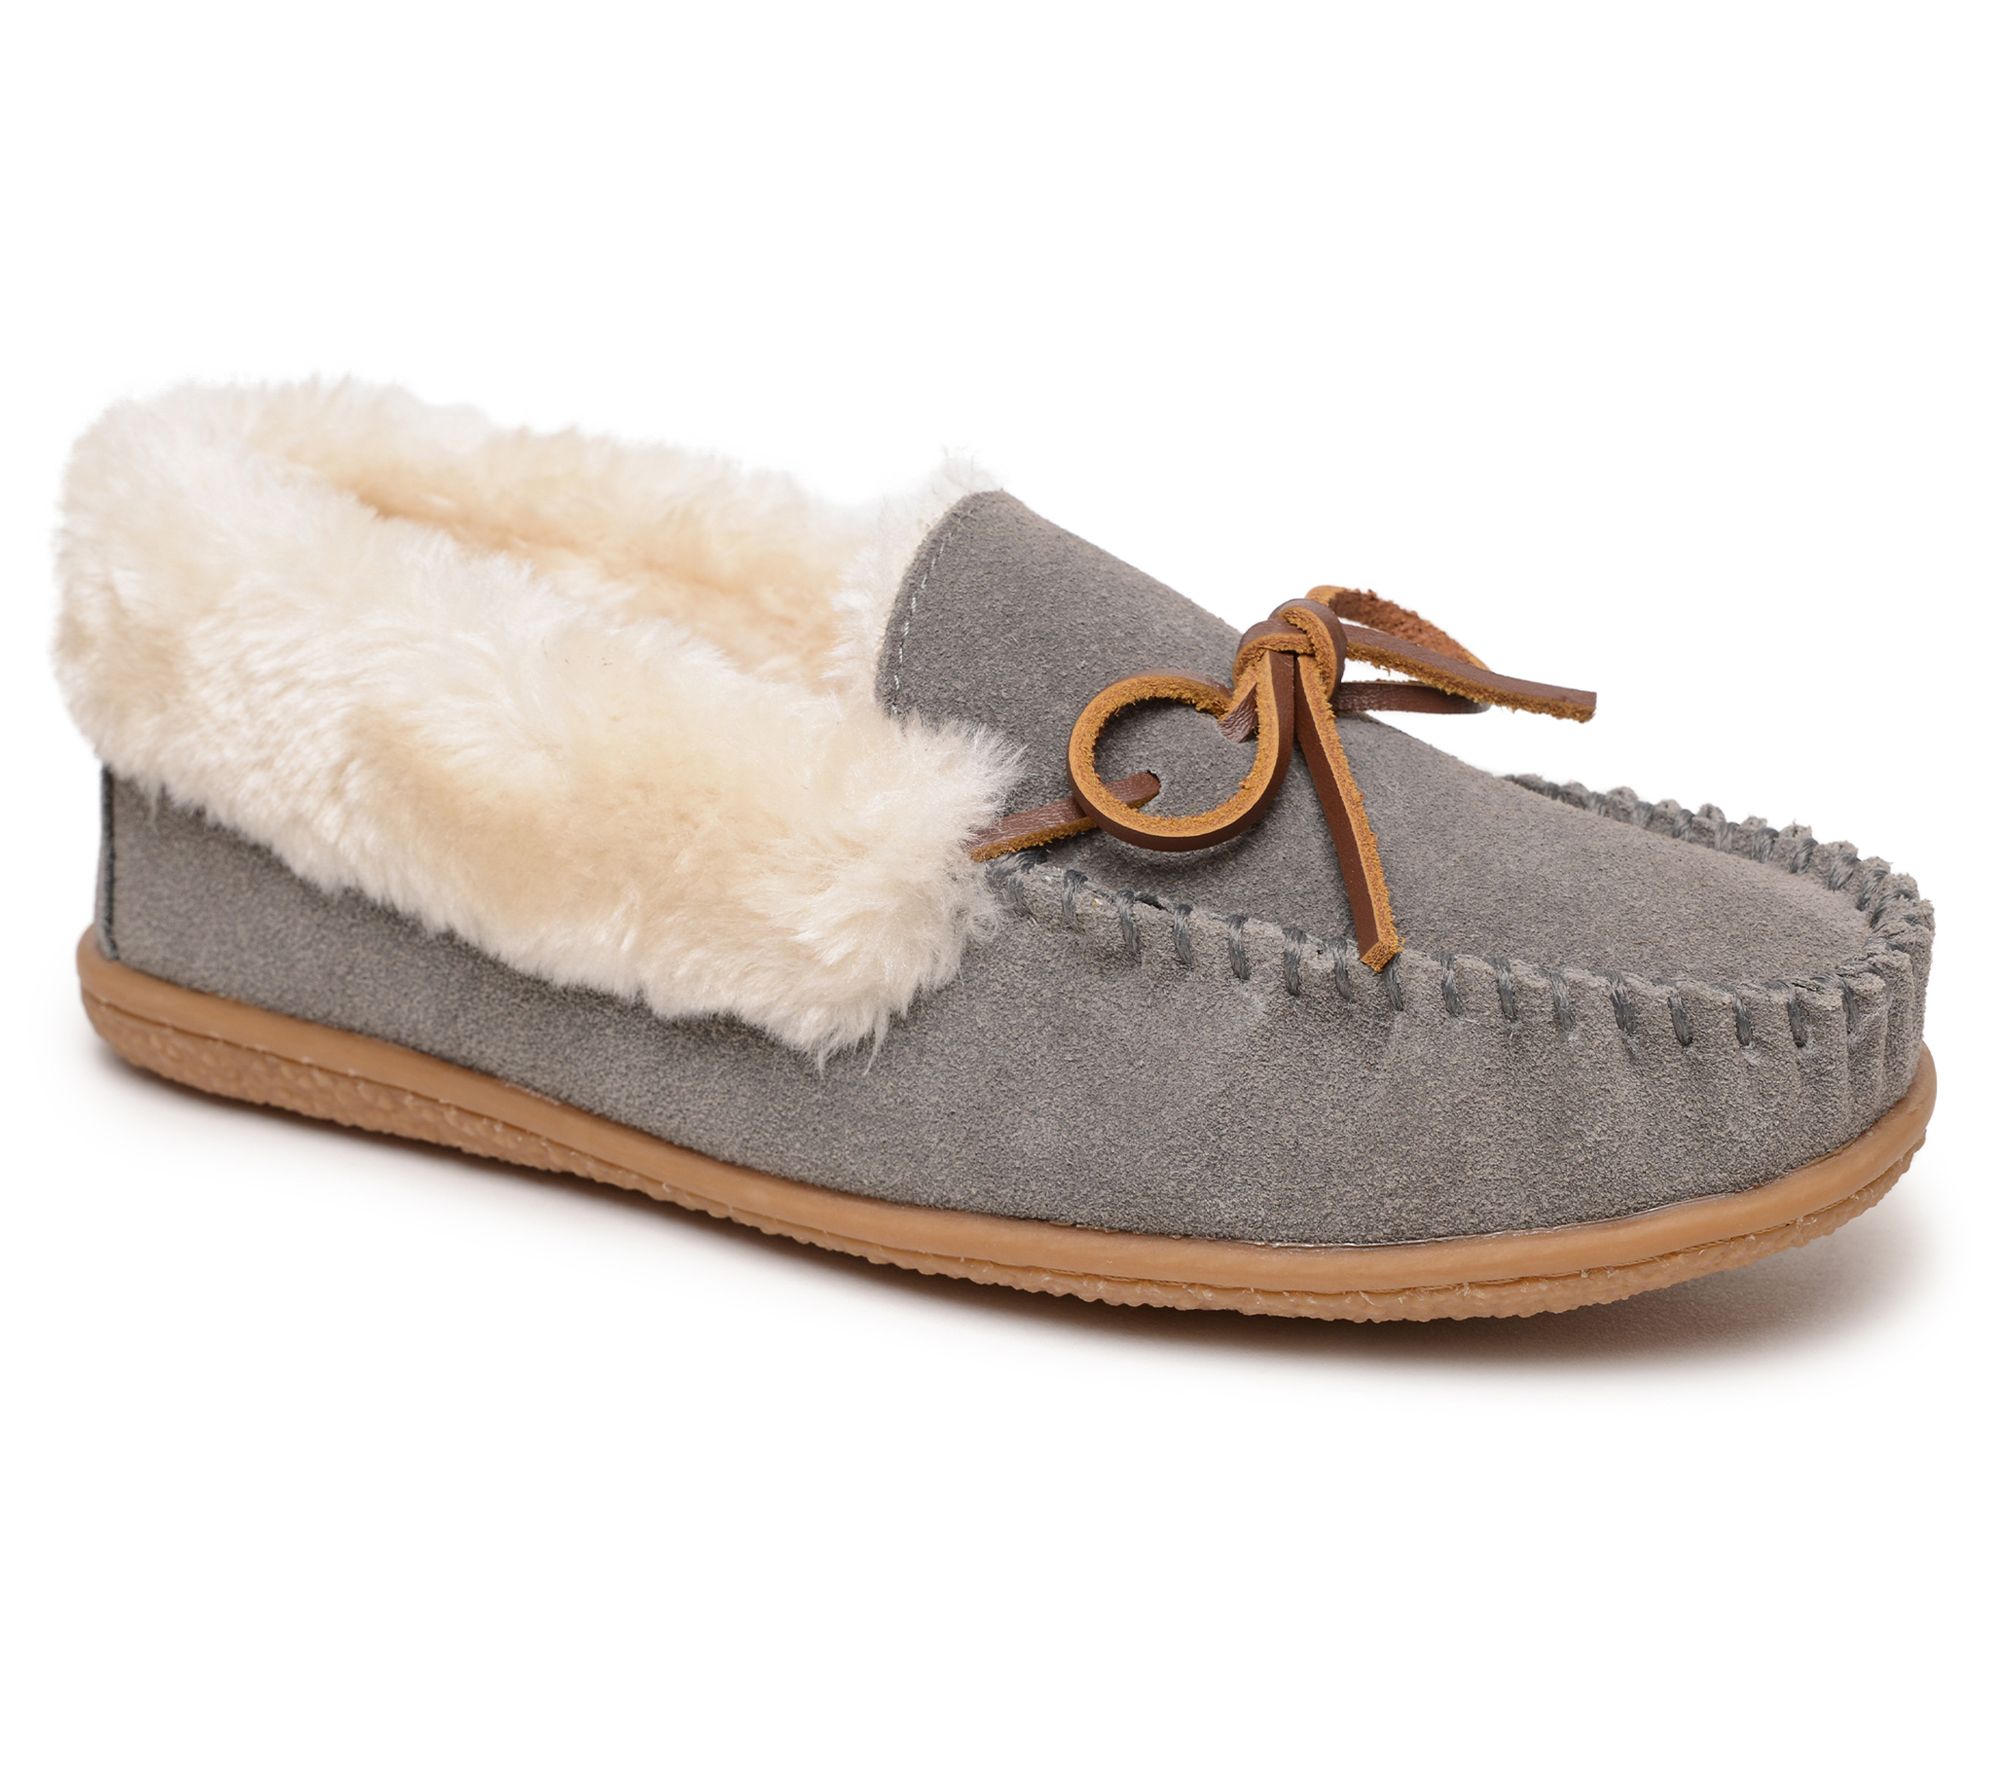 Women's Camp Suede Moccasin Slippers - QVC.com